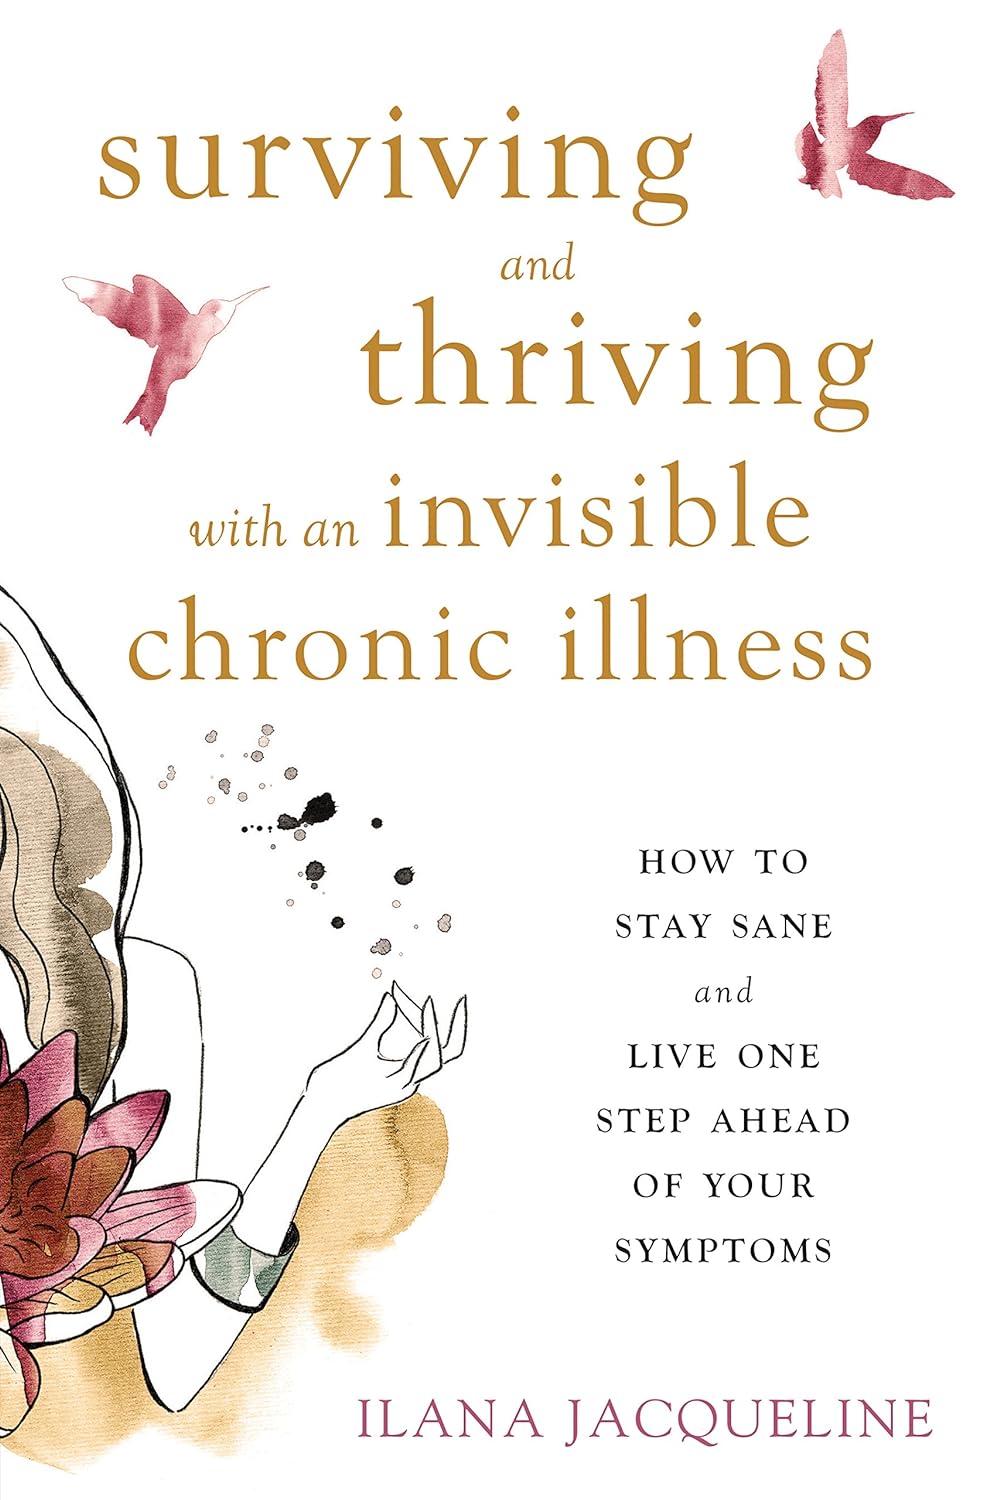 Surviving and Thriving with an Invisible Chronic Illness by Ilana Jacqueline